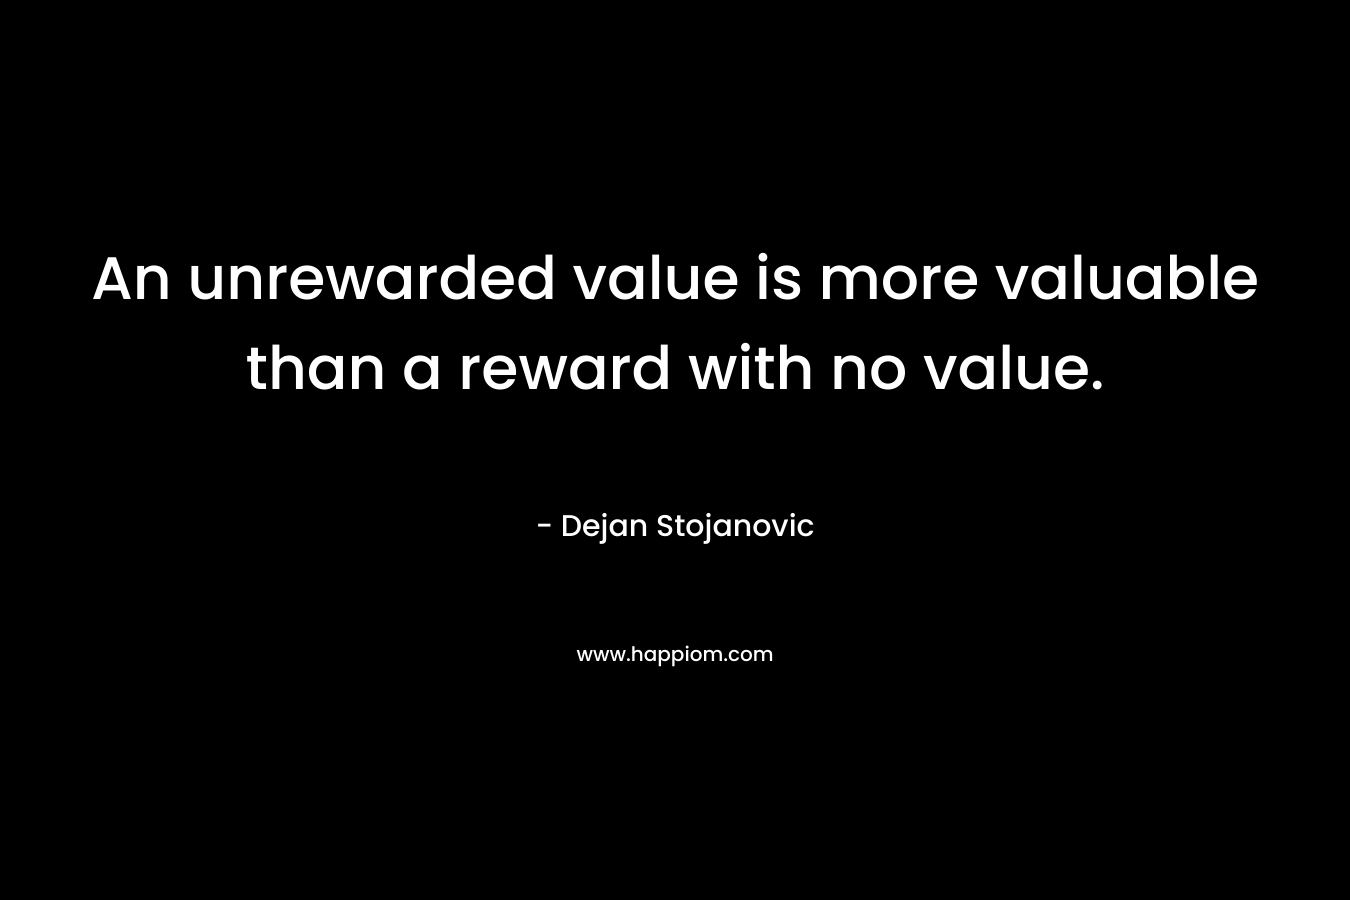 An unrewarded value is more valuable than a reward with no value. – Dejan Stojanovic